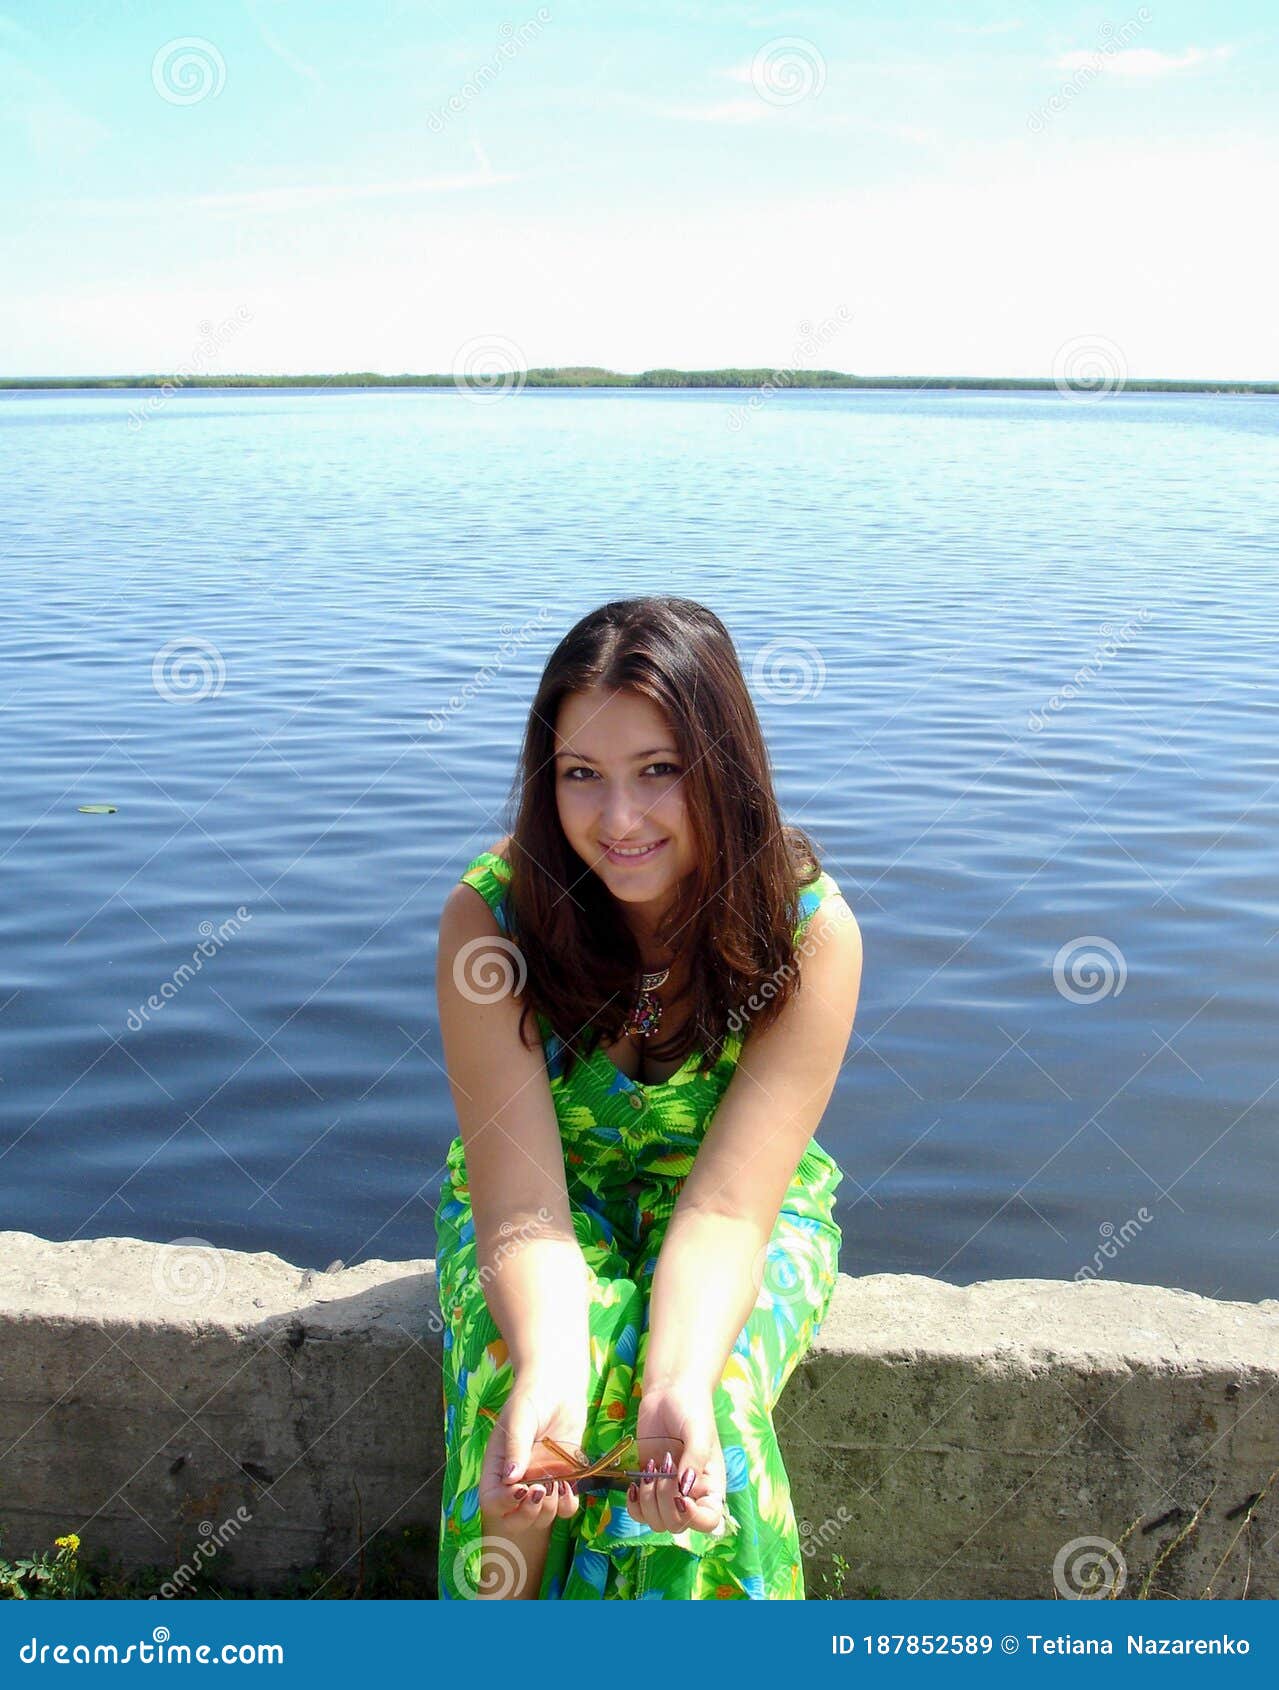 Simpy Ordinary Girl From Small Town Lifestyle Of Young People Stock Image Image Of Ordinary 